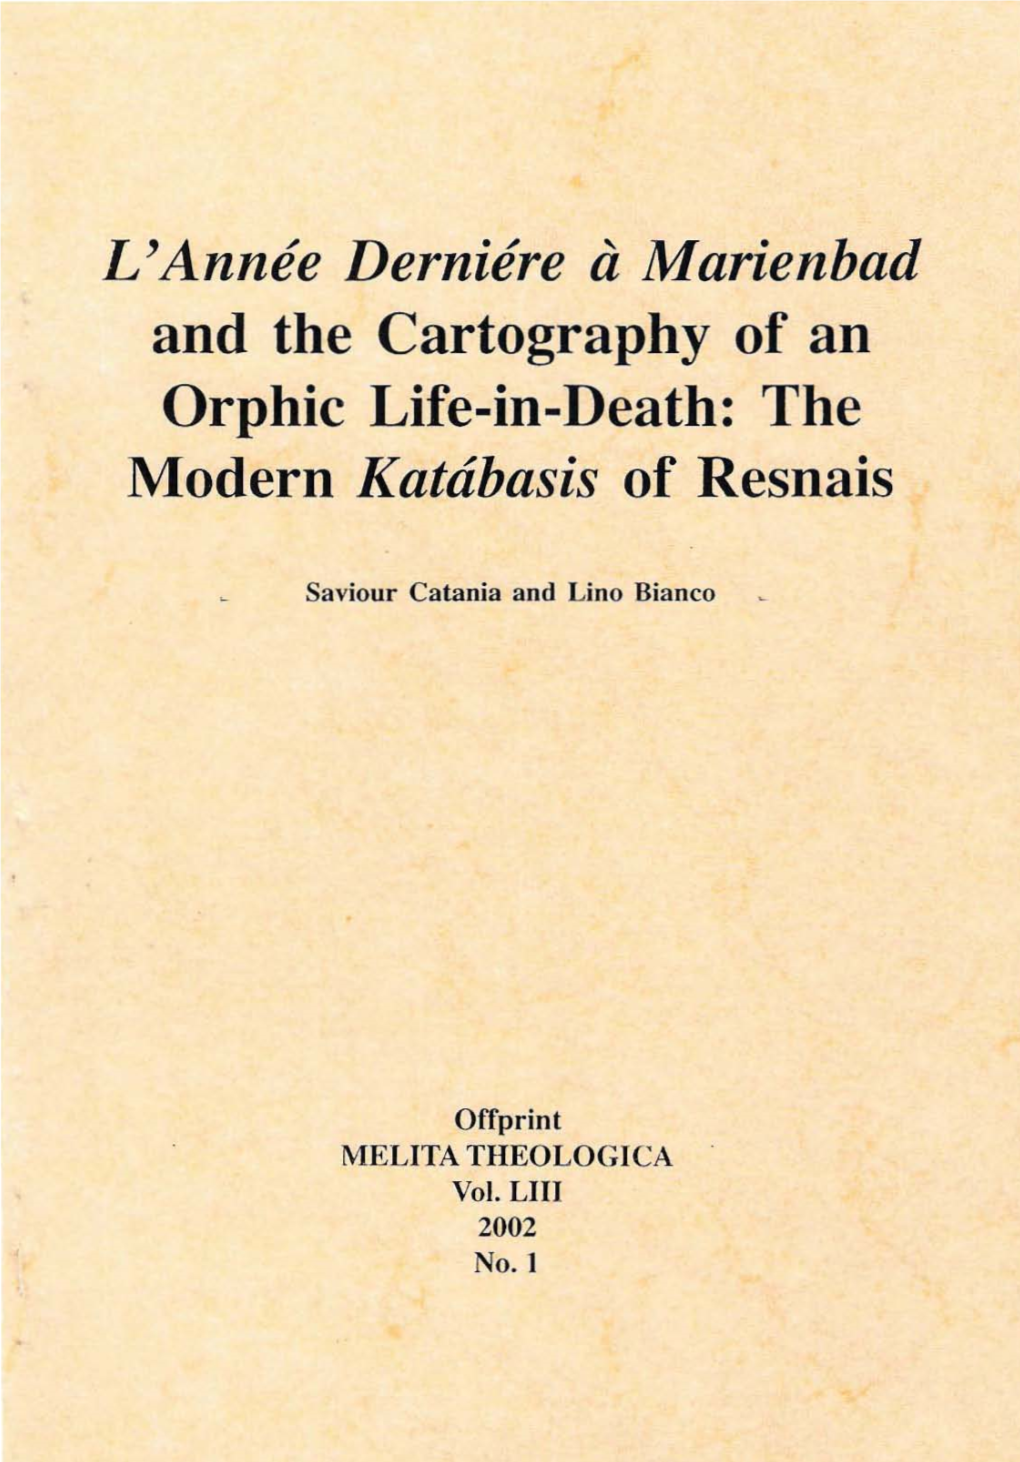 L' Annie Derniire a Marienbad and the Cartography of an Orphic Life-In-Death: the Modern Katdbasis of Resnais